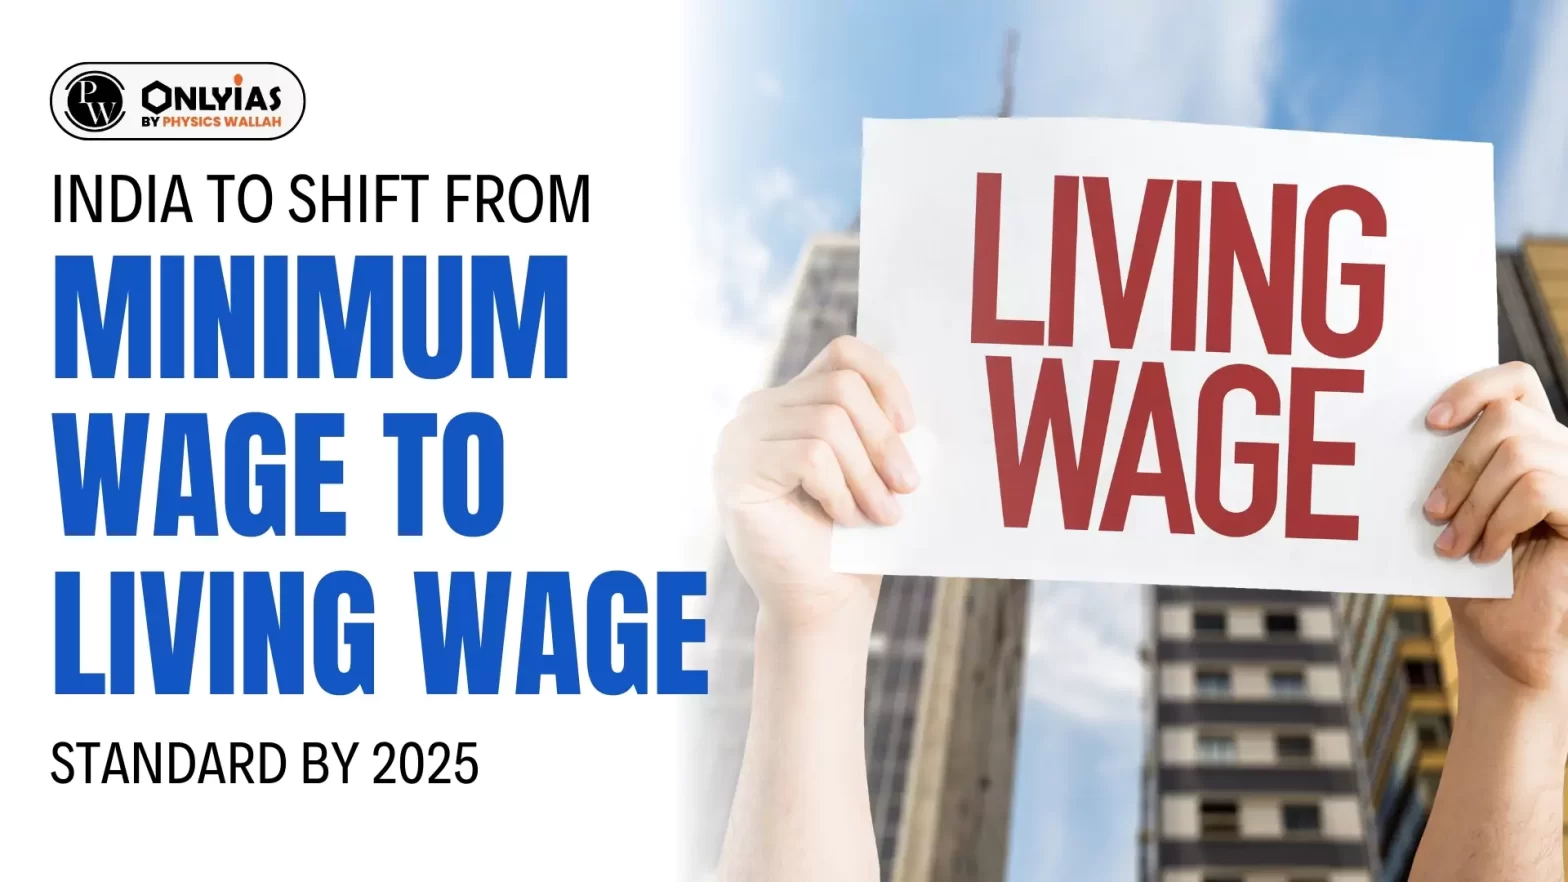 India to Shift From Minimum Wage to Living Wage Living Wage Standard by 2025